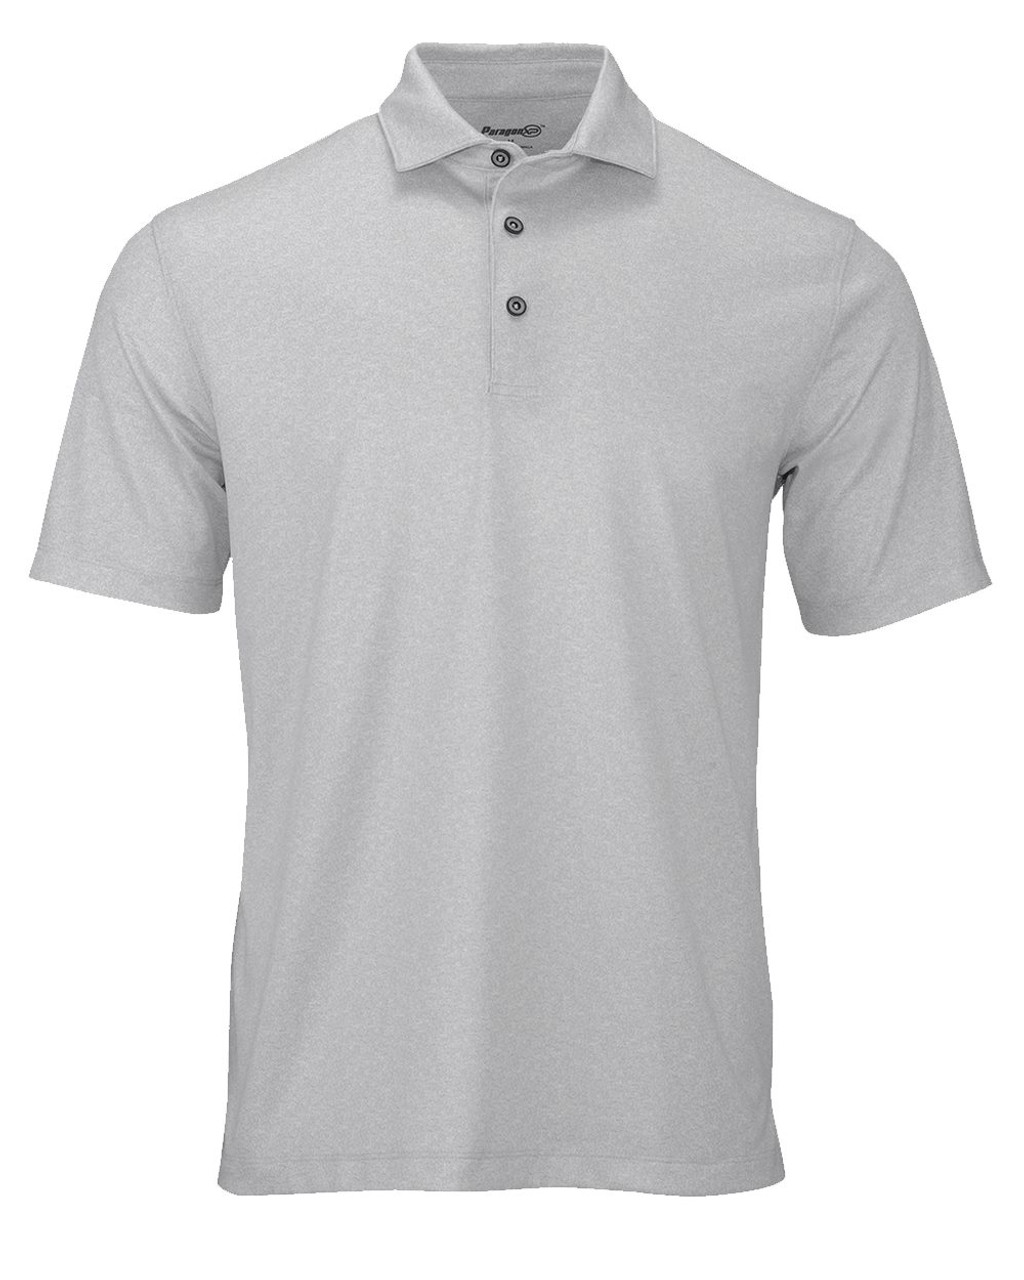 Embroidered Derby Sublimated Heathered Polo - 152